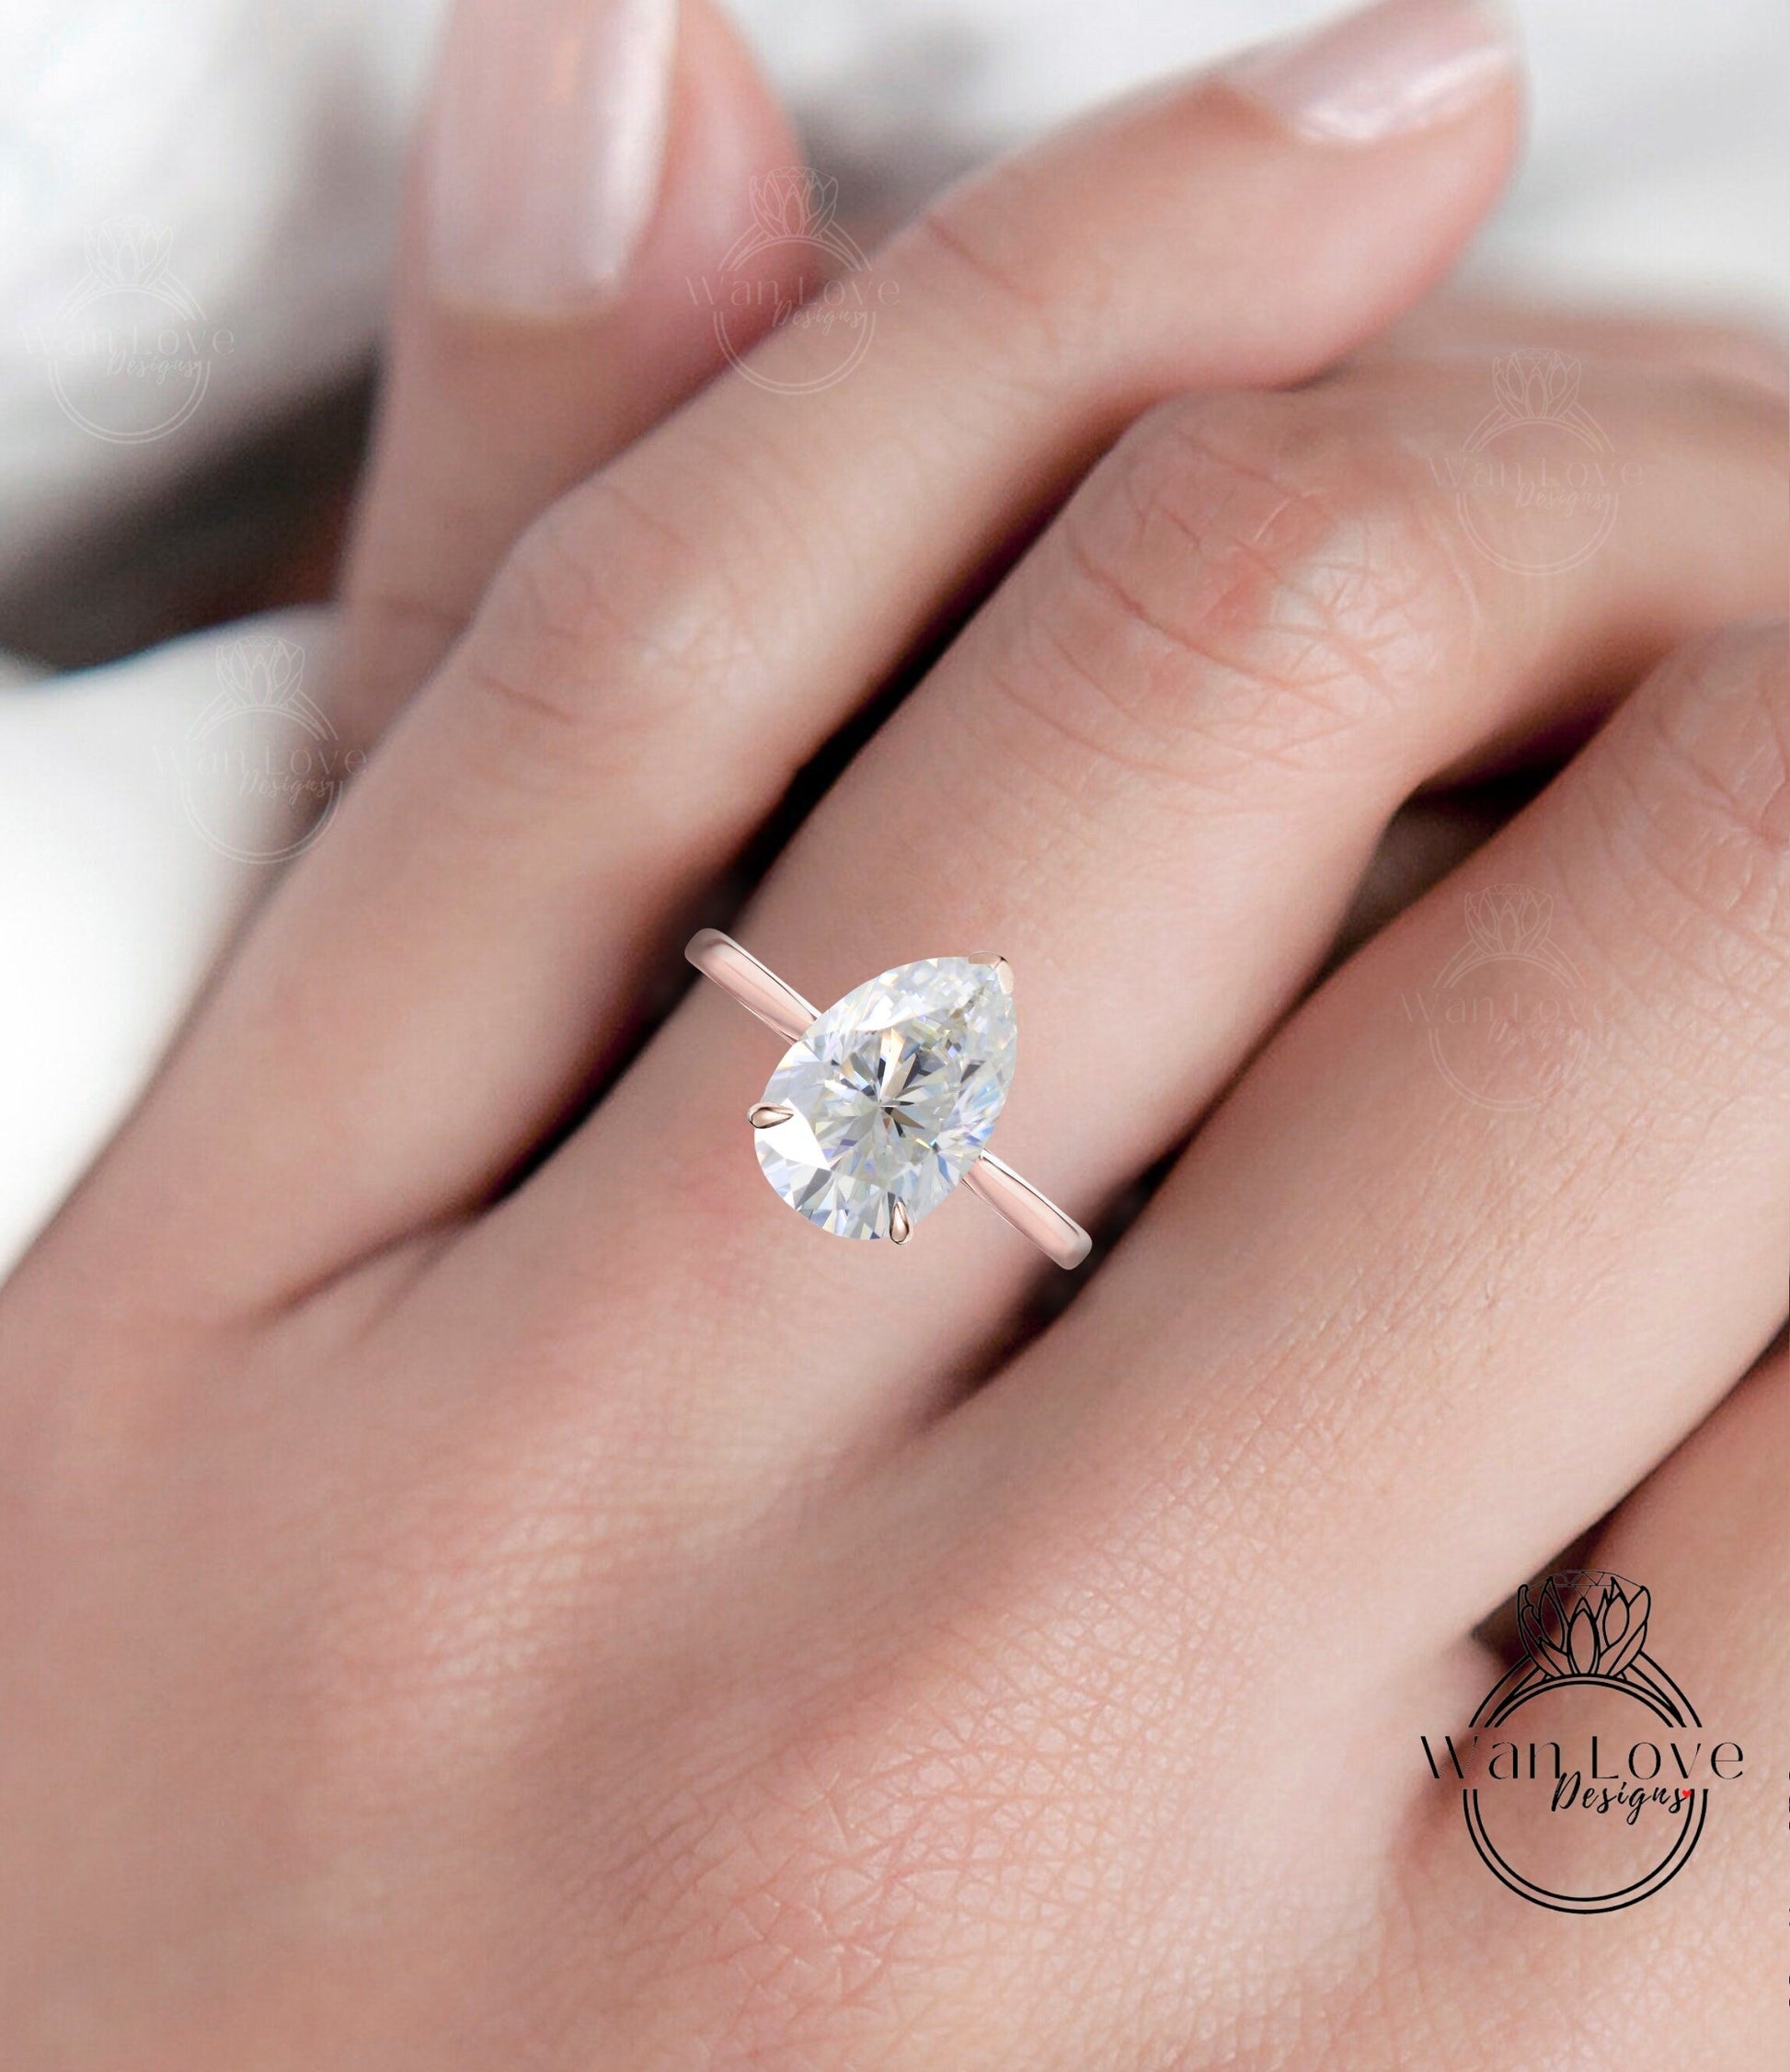 3 ct Pear Shaped Moissanite Engagement Ring-White Gold or Rose Gold Classic Solitaire Ring-Teardrop Moissanite Ring-Tear Drop Cut Pear Shape Wan Love Designs